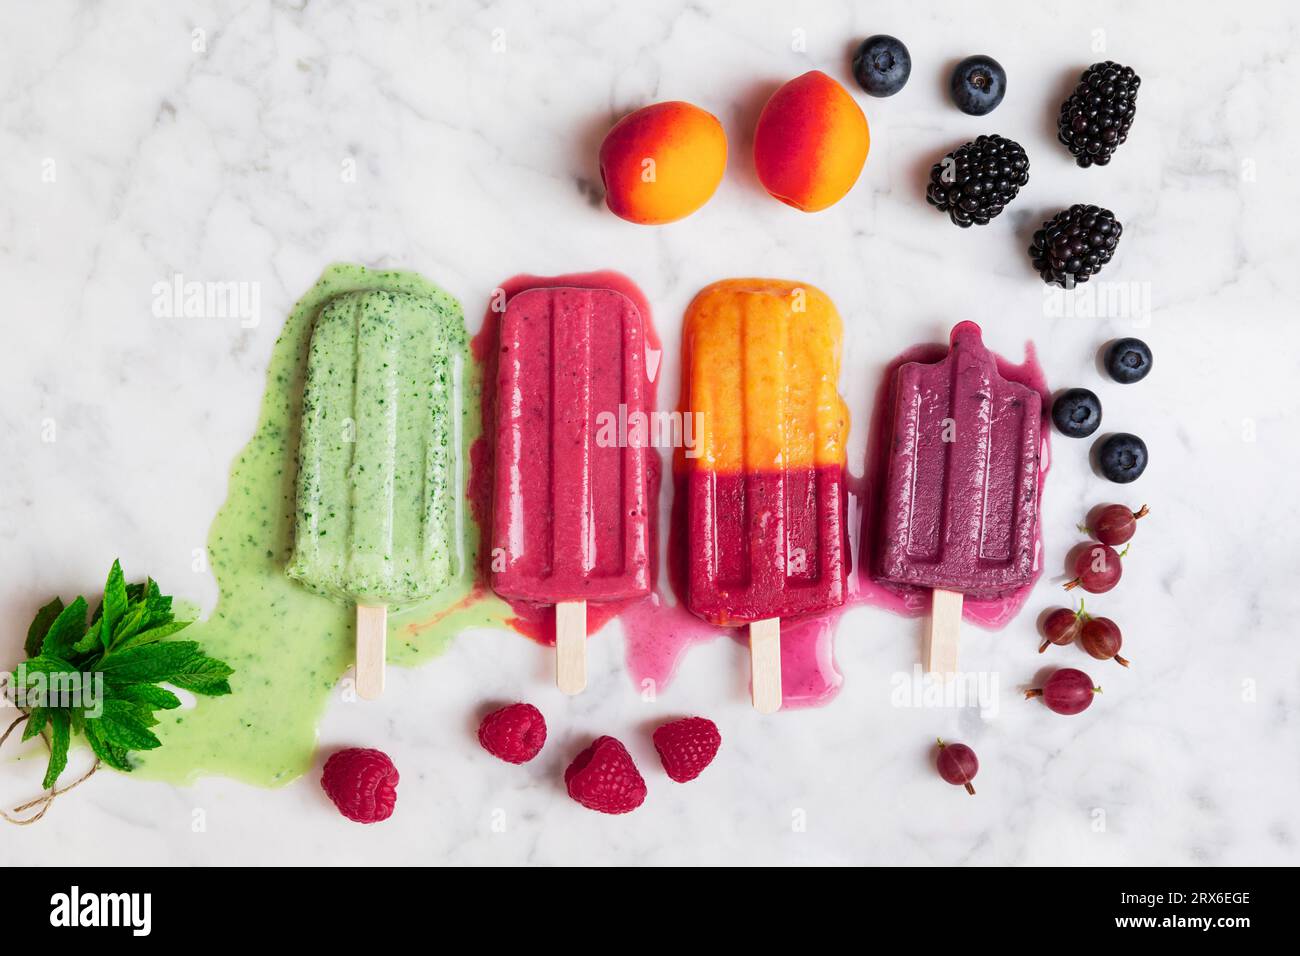 Berry fruits and melting popsicles on marble surface Stock Photo